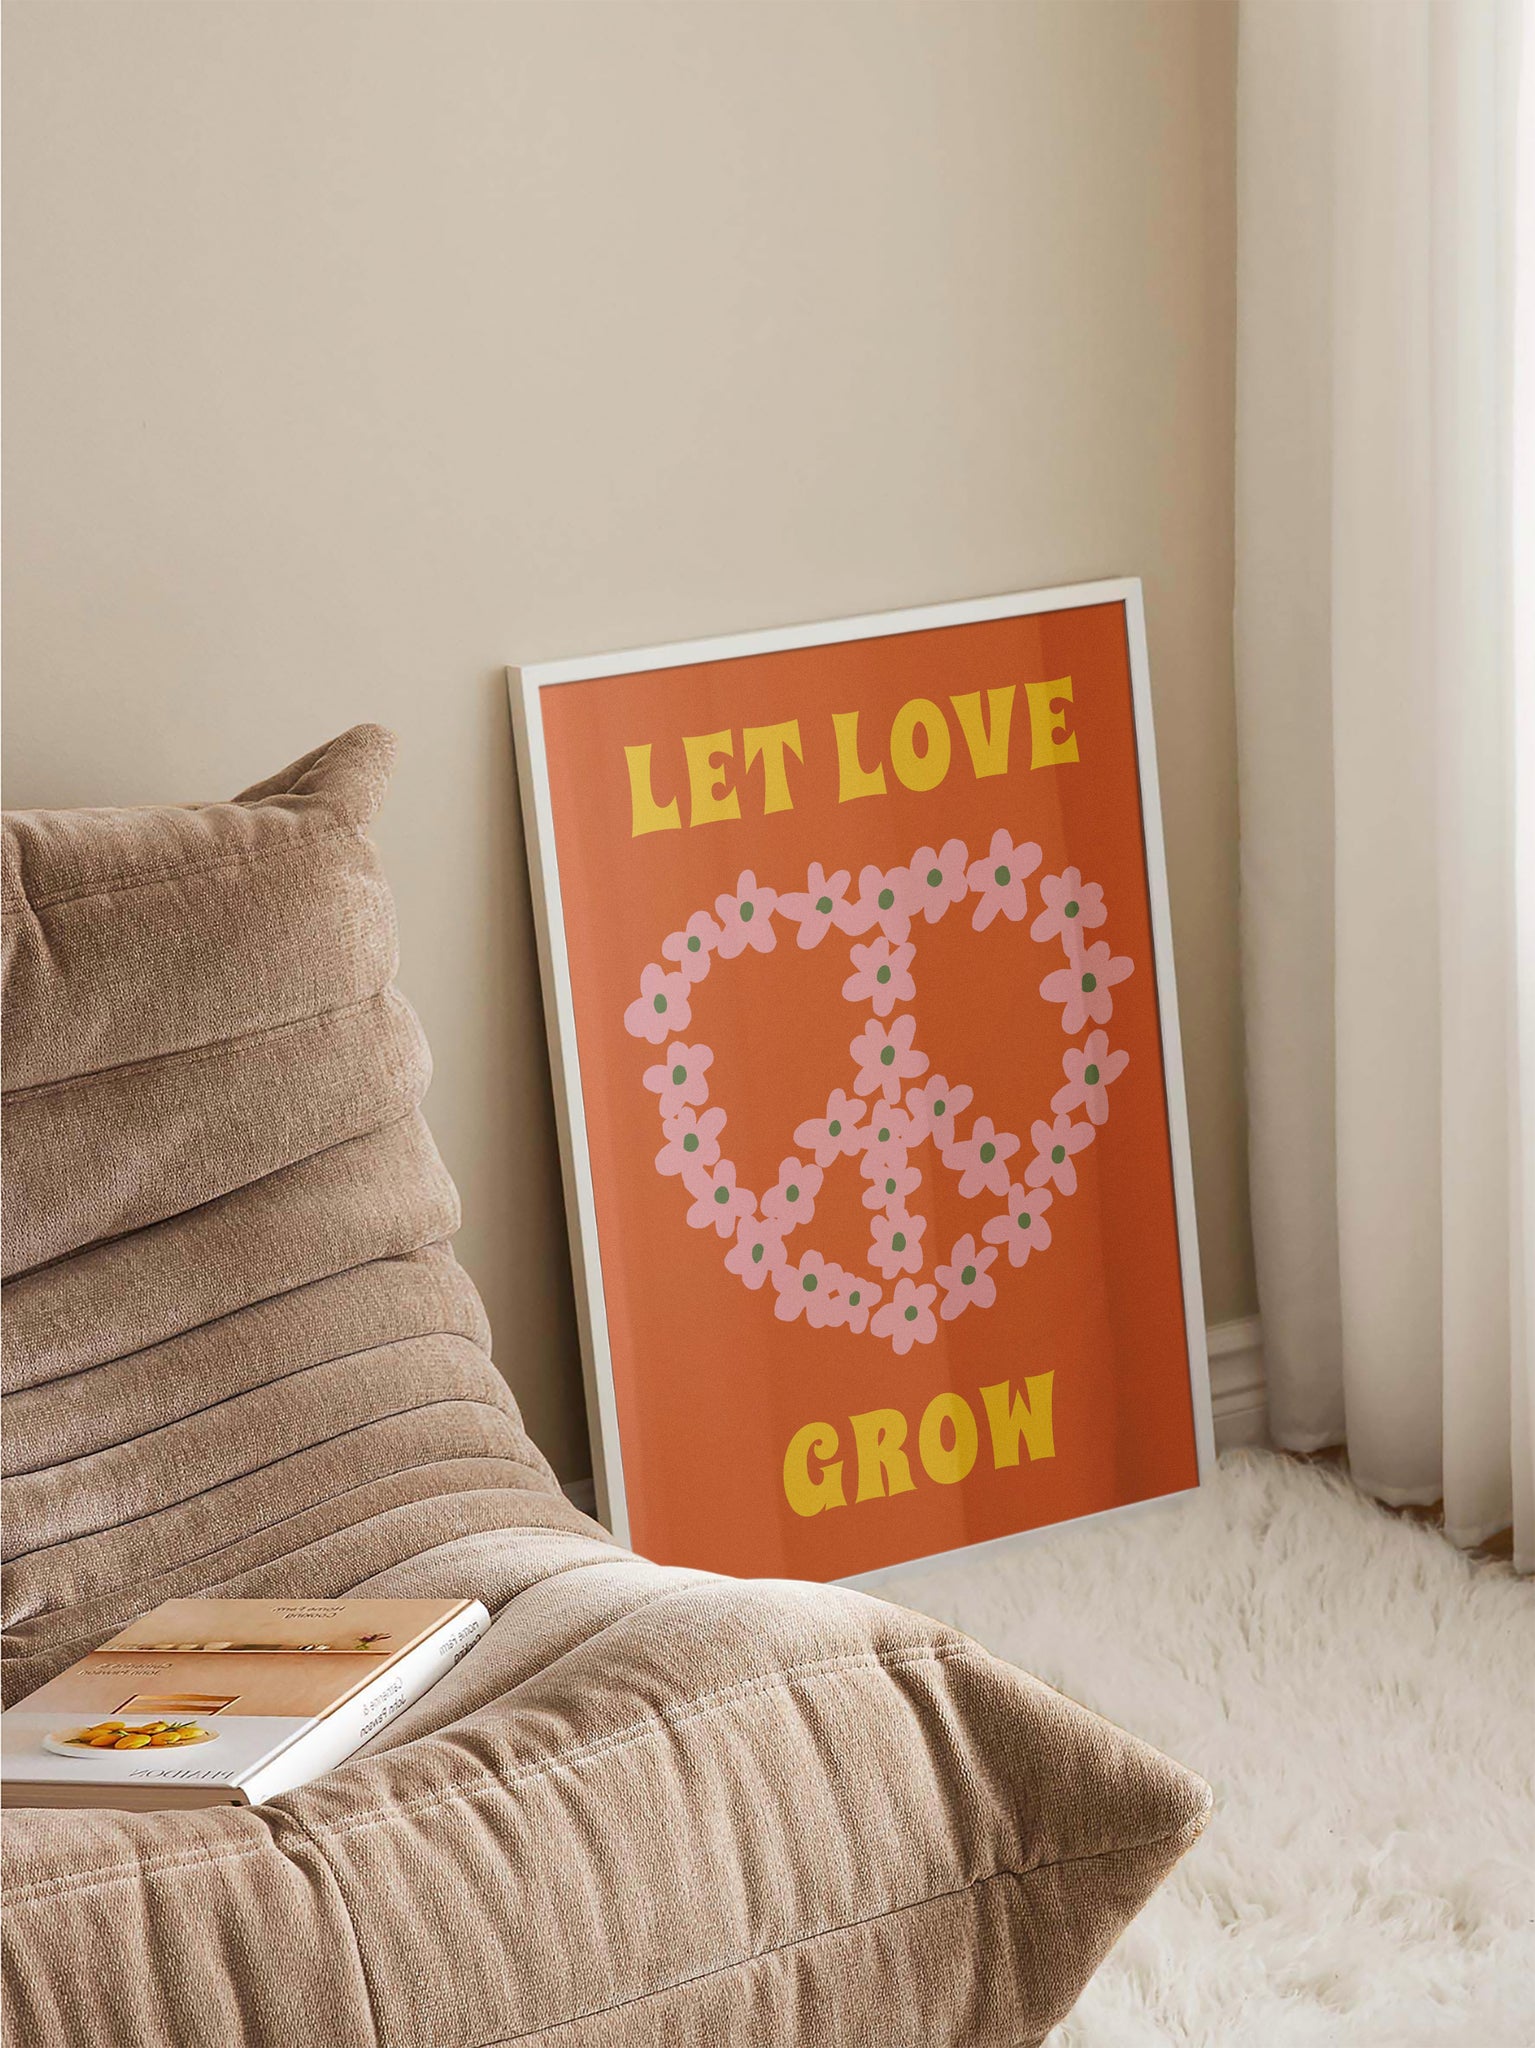 Let Love Grow poster